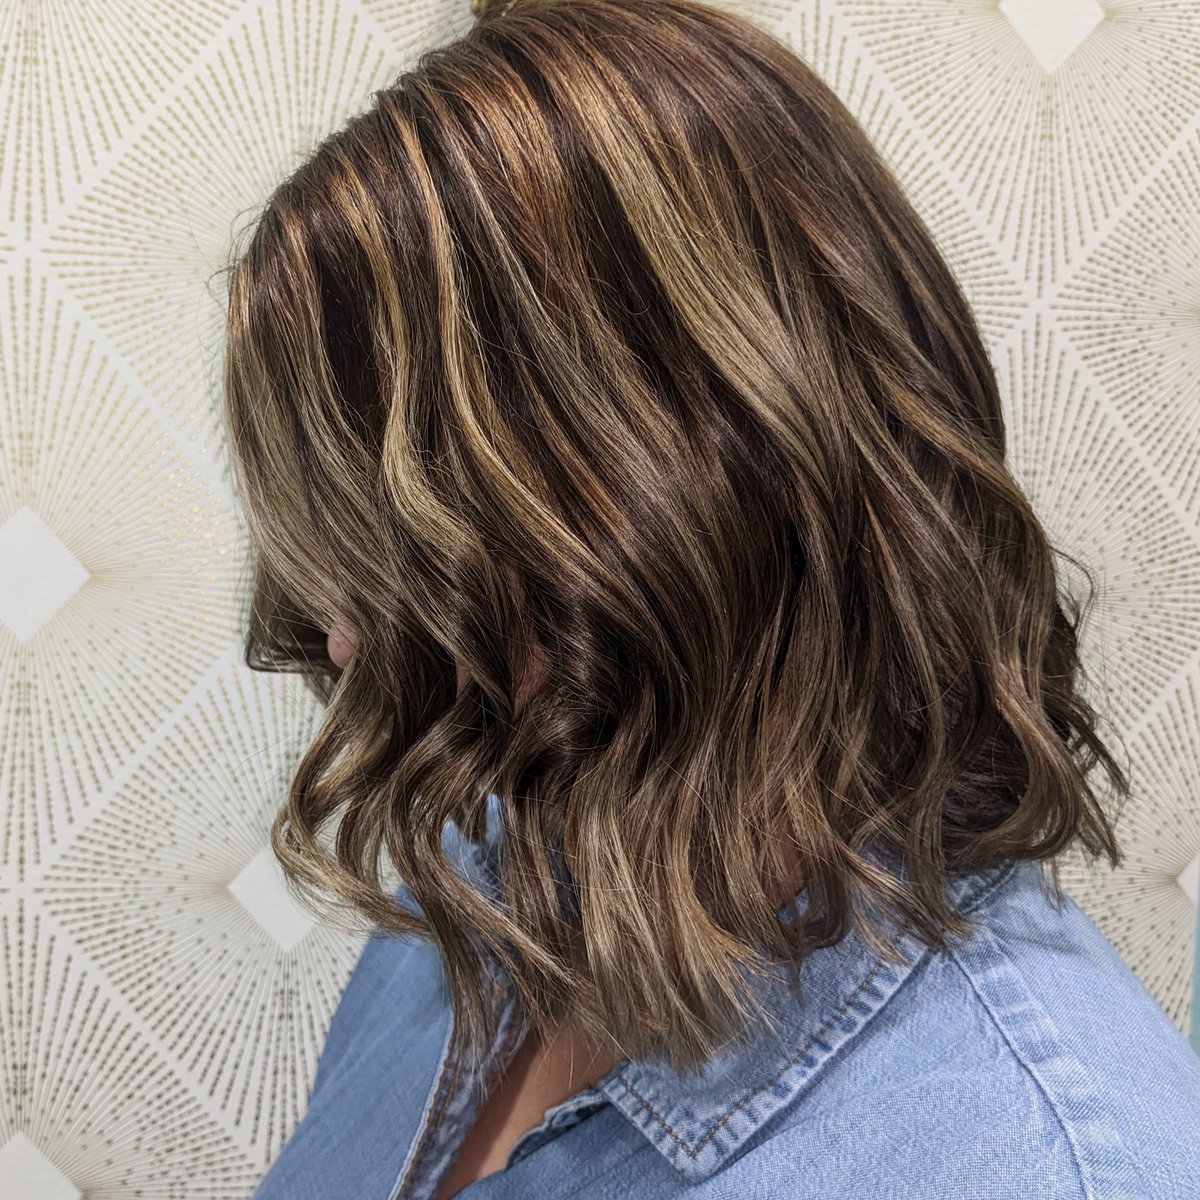 Let the expert stylist transform your hair into a work of art. Book your appointment today!
-
#PalmBeachHair #HairSalonPalmBeach #PalmBeachHairstylist
#PalmBeachBeauty #HairColorPalmBeach #PalmBeachSpa
#PalmBeachGlam #PalmBeachBlonde #HairExtensionsPalmBeach
#PalmBeachHairc